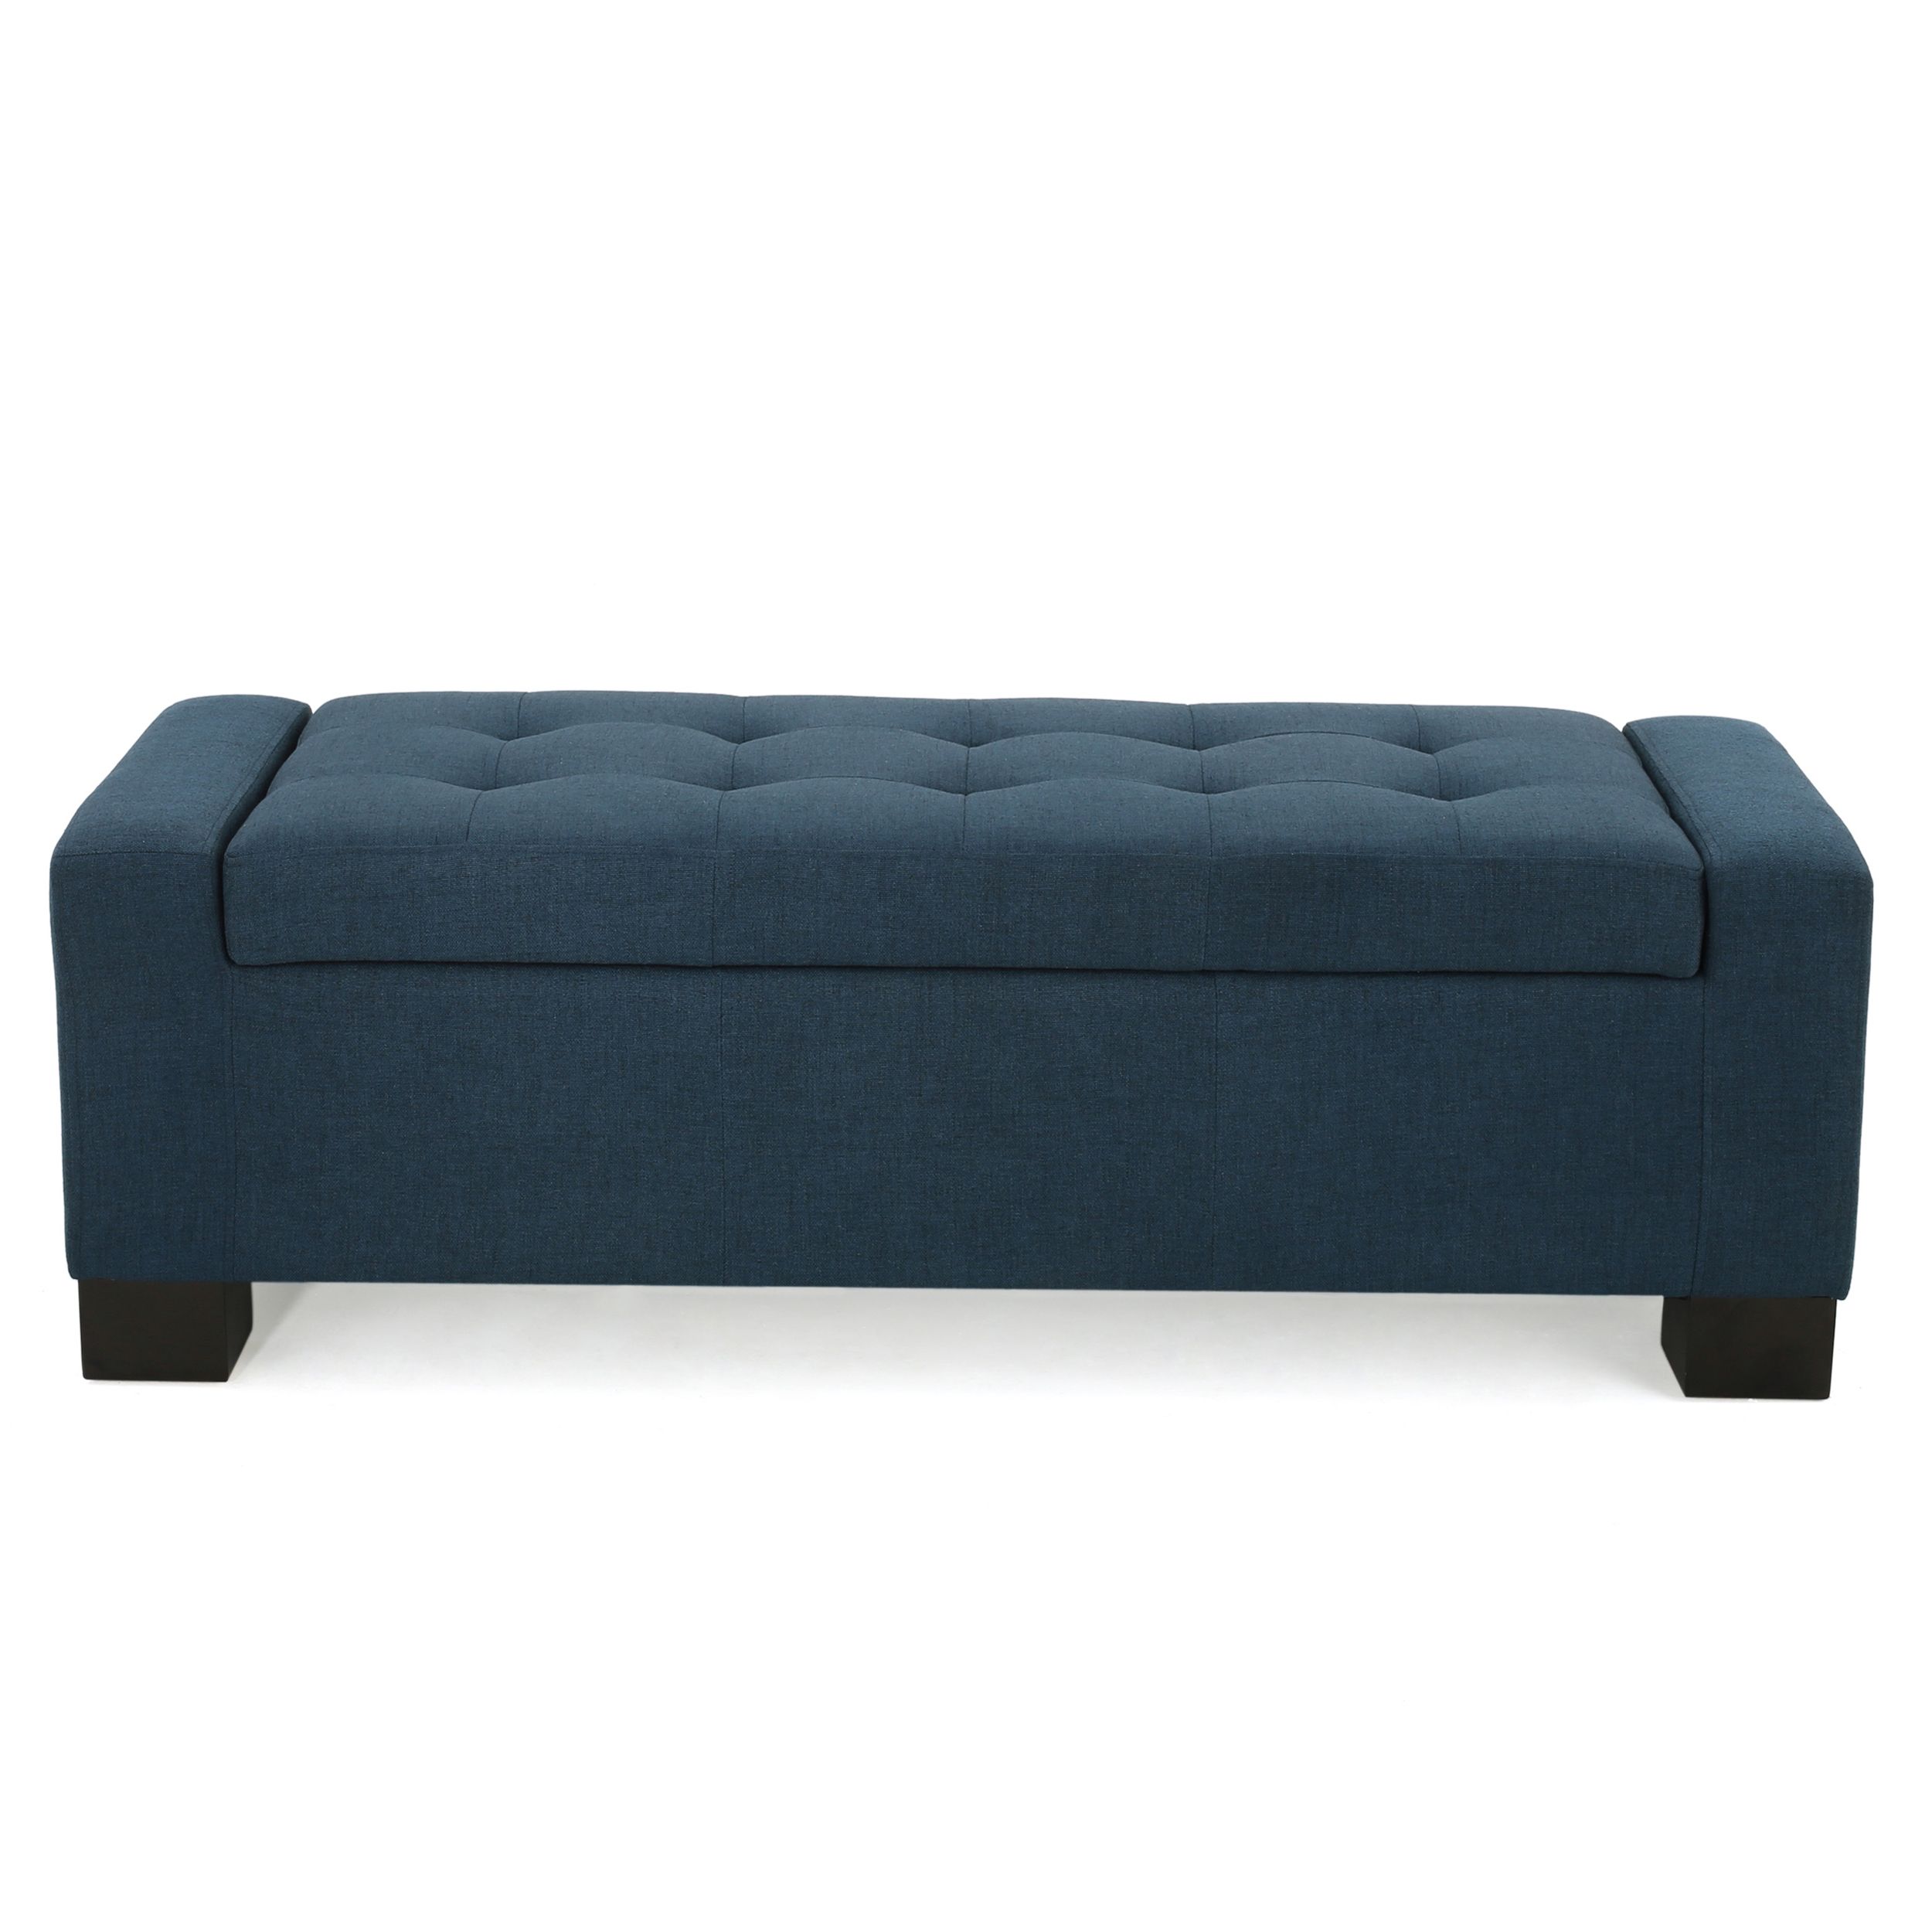 Recent Lawson Contemporary Tufted Fabric Storage Ottoman Bench, Dark Blue In Fabric Tufted Storage Ottomans (View 3 of 10)